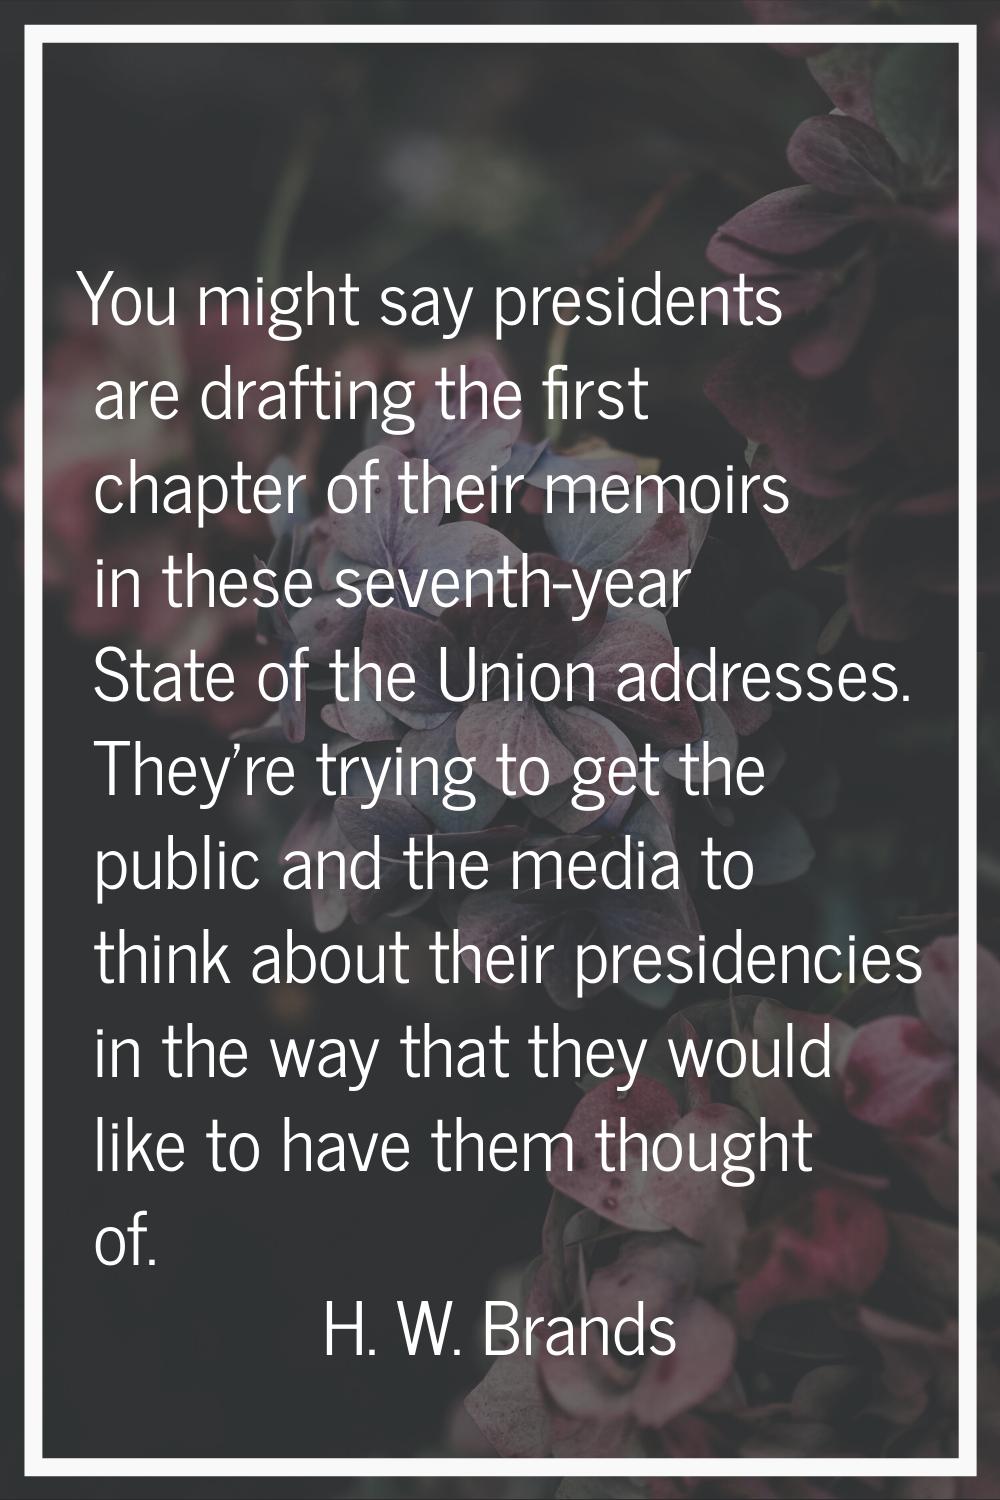 You might say presidents are drafting the first chapter of their memoirs in these seventh-year Stat